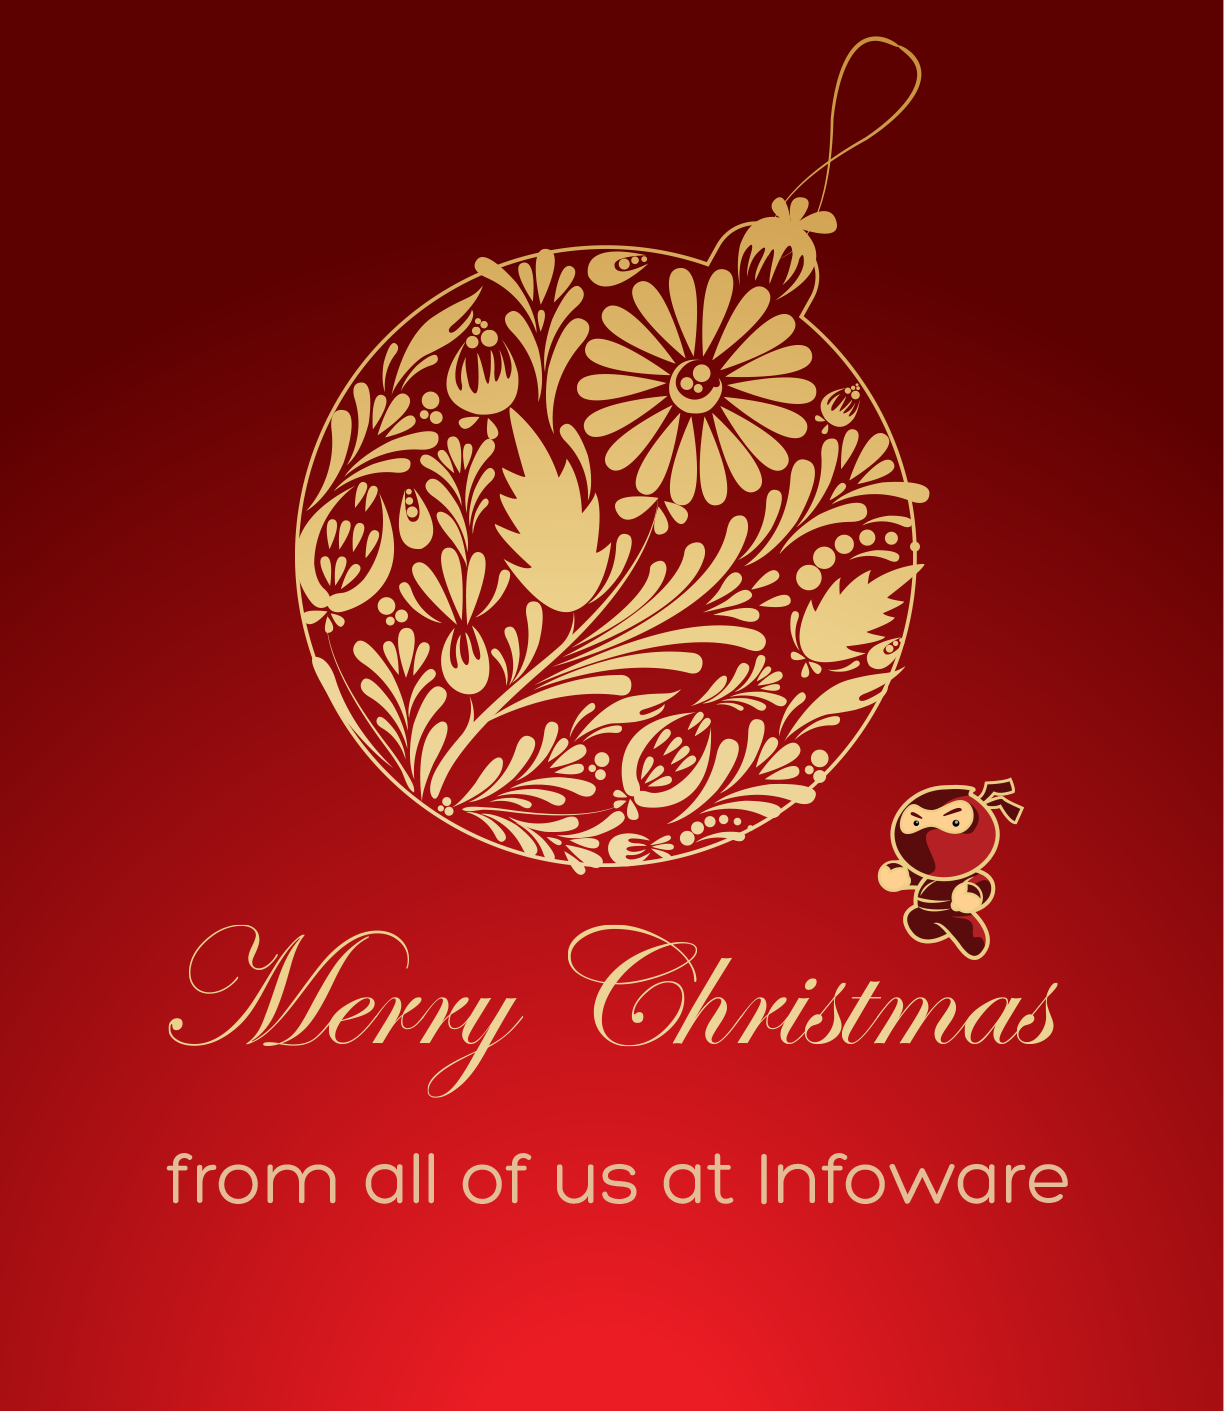 Merry Christmas from Infoware